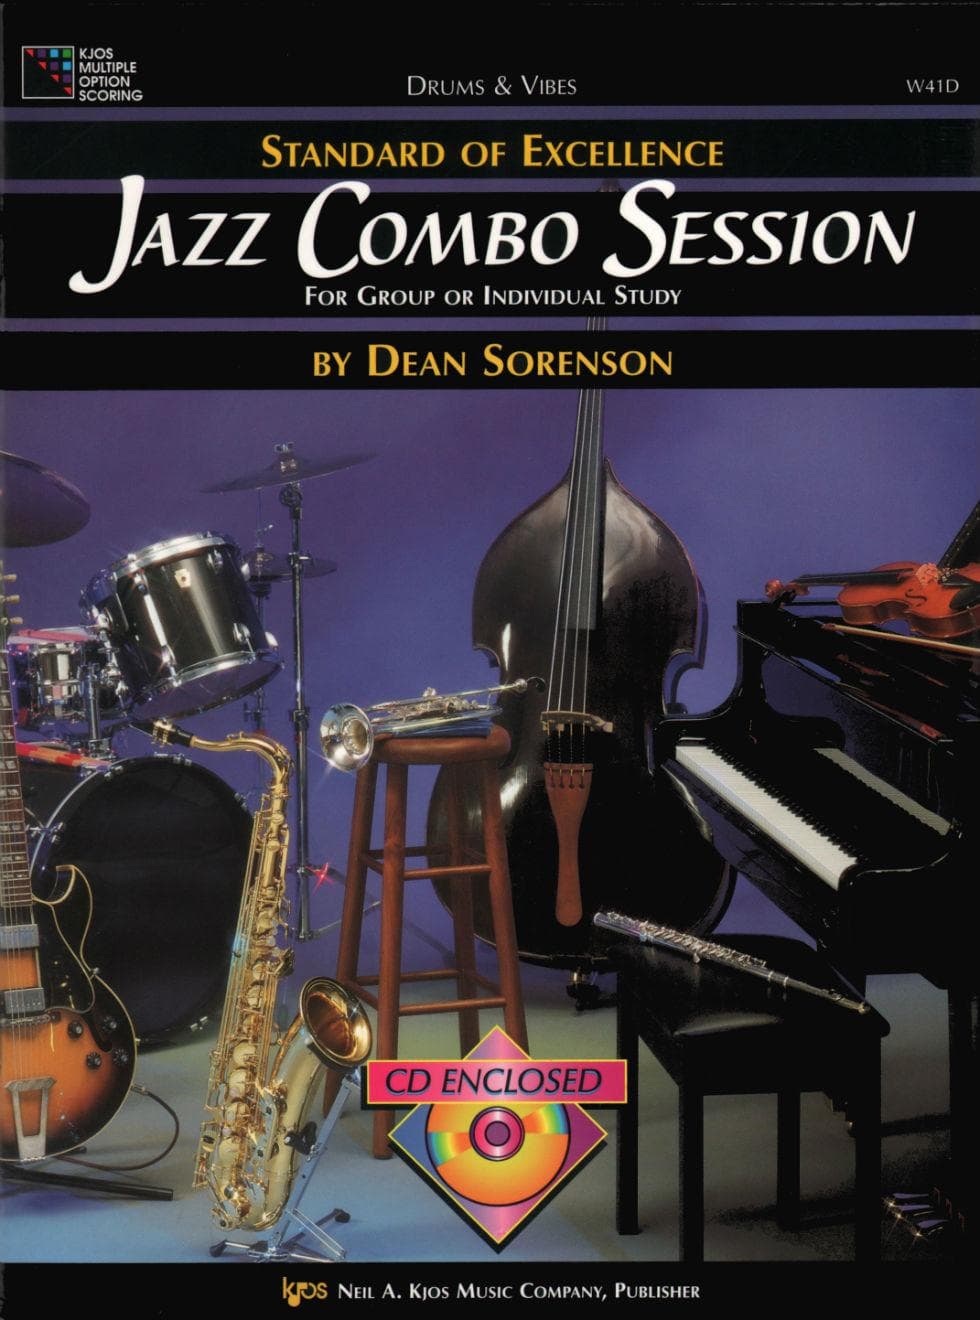 Sorenson, Dean - Jazz Combo Session, for Drums/Vibes Published by Neil A Kjos Music Company